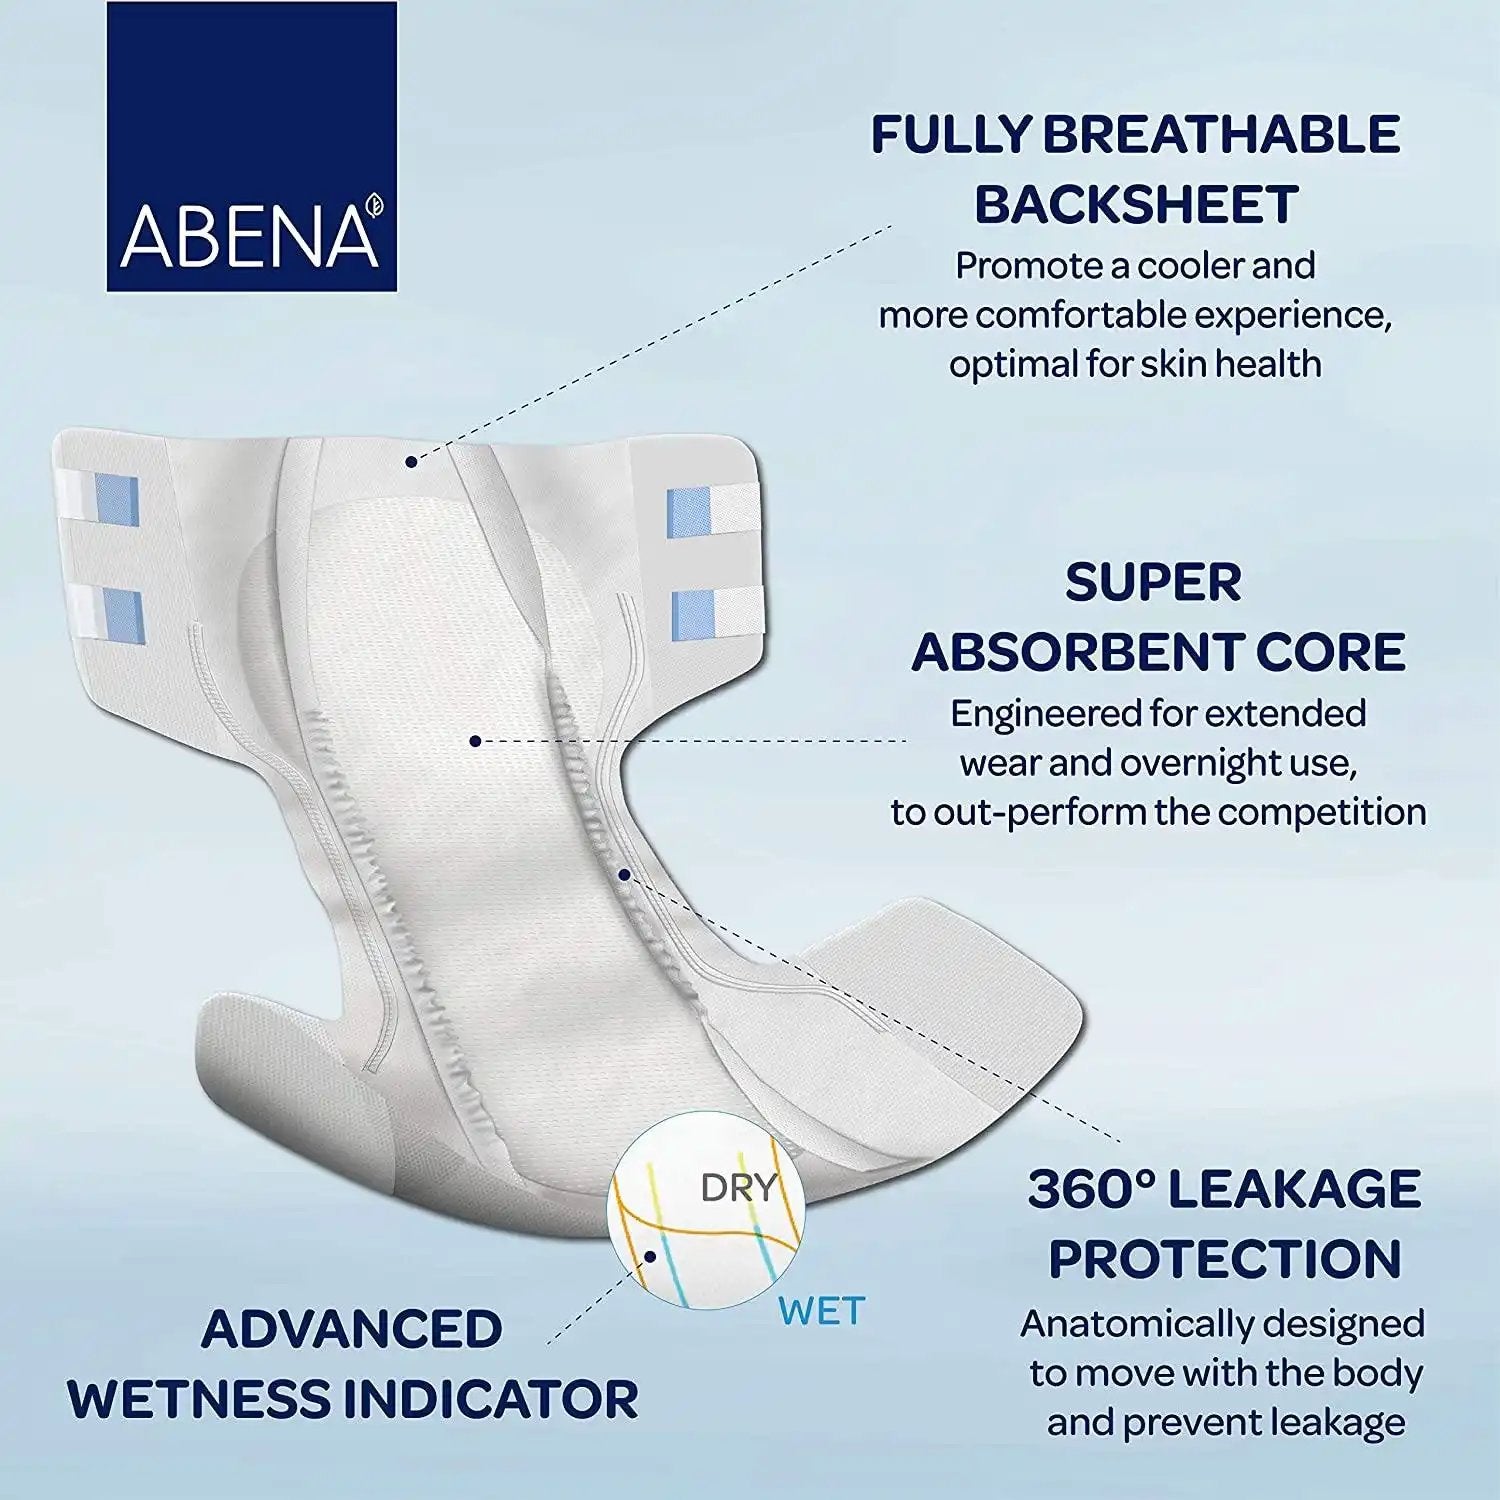 Unisex Adult Incontinence Brief Abri-Form Premium L2 Large Disposable Heavy Absorbency - KatyMedSolutions